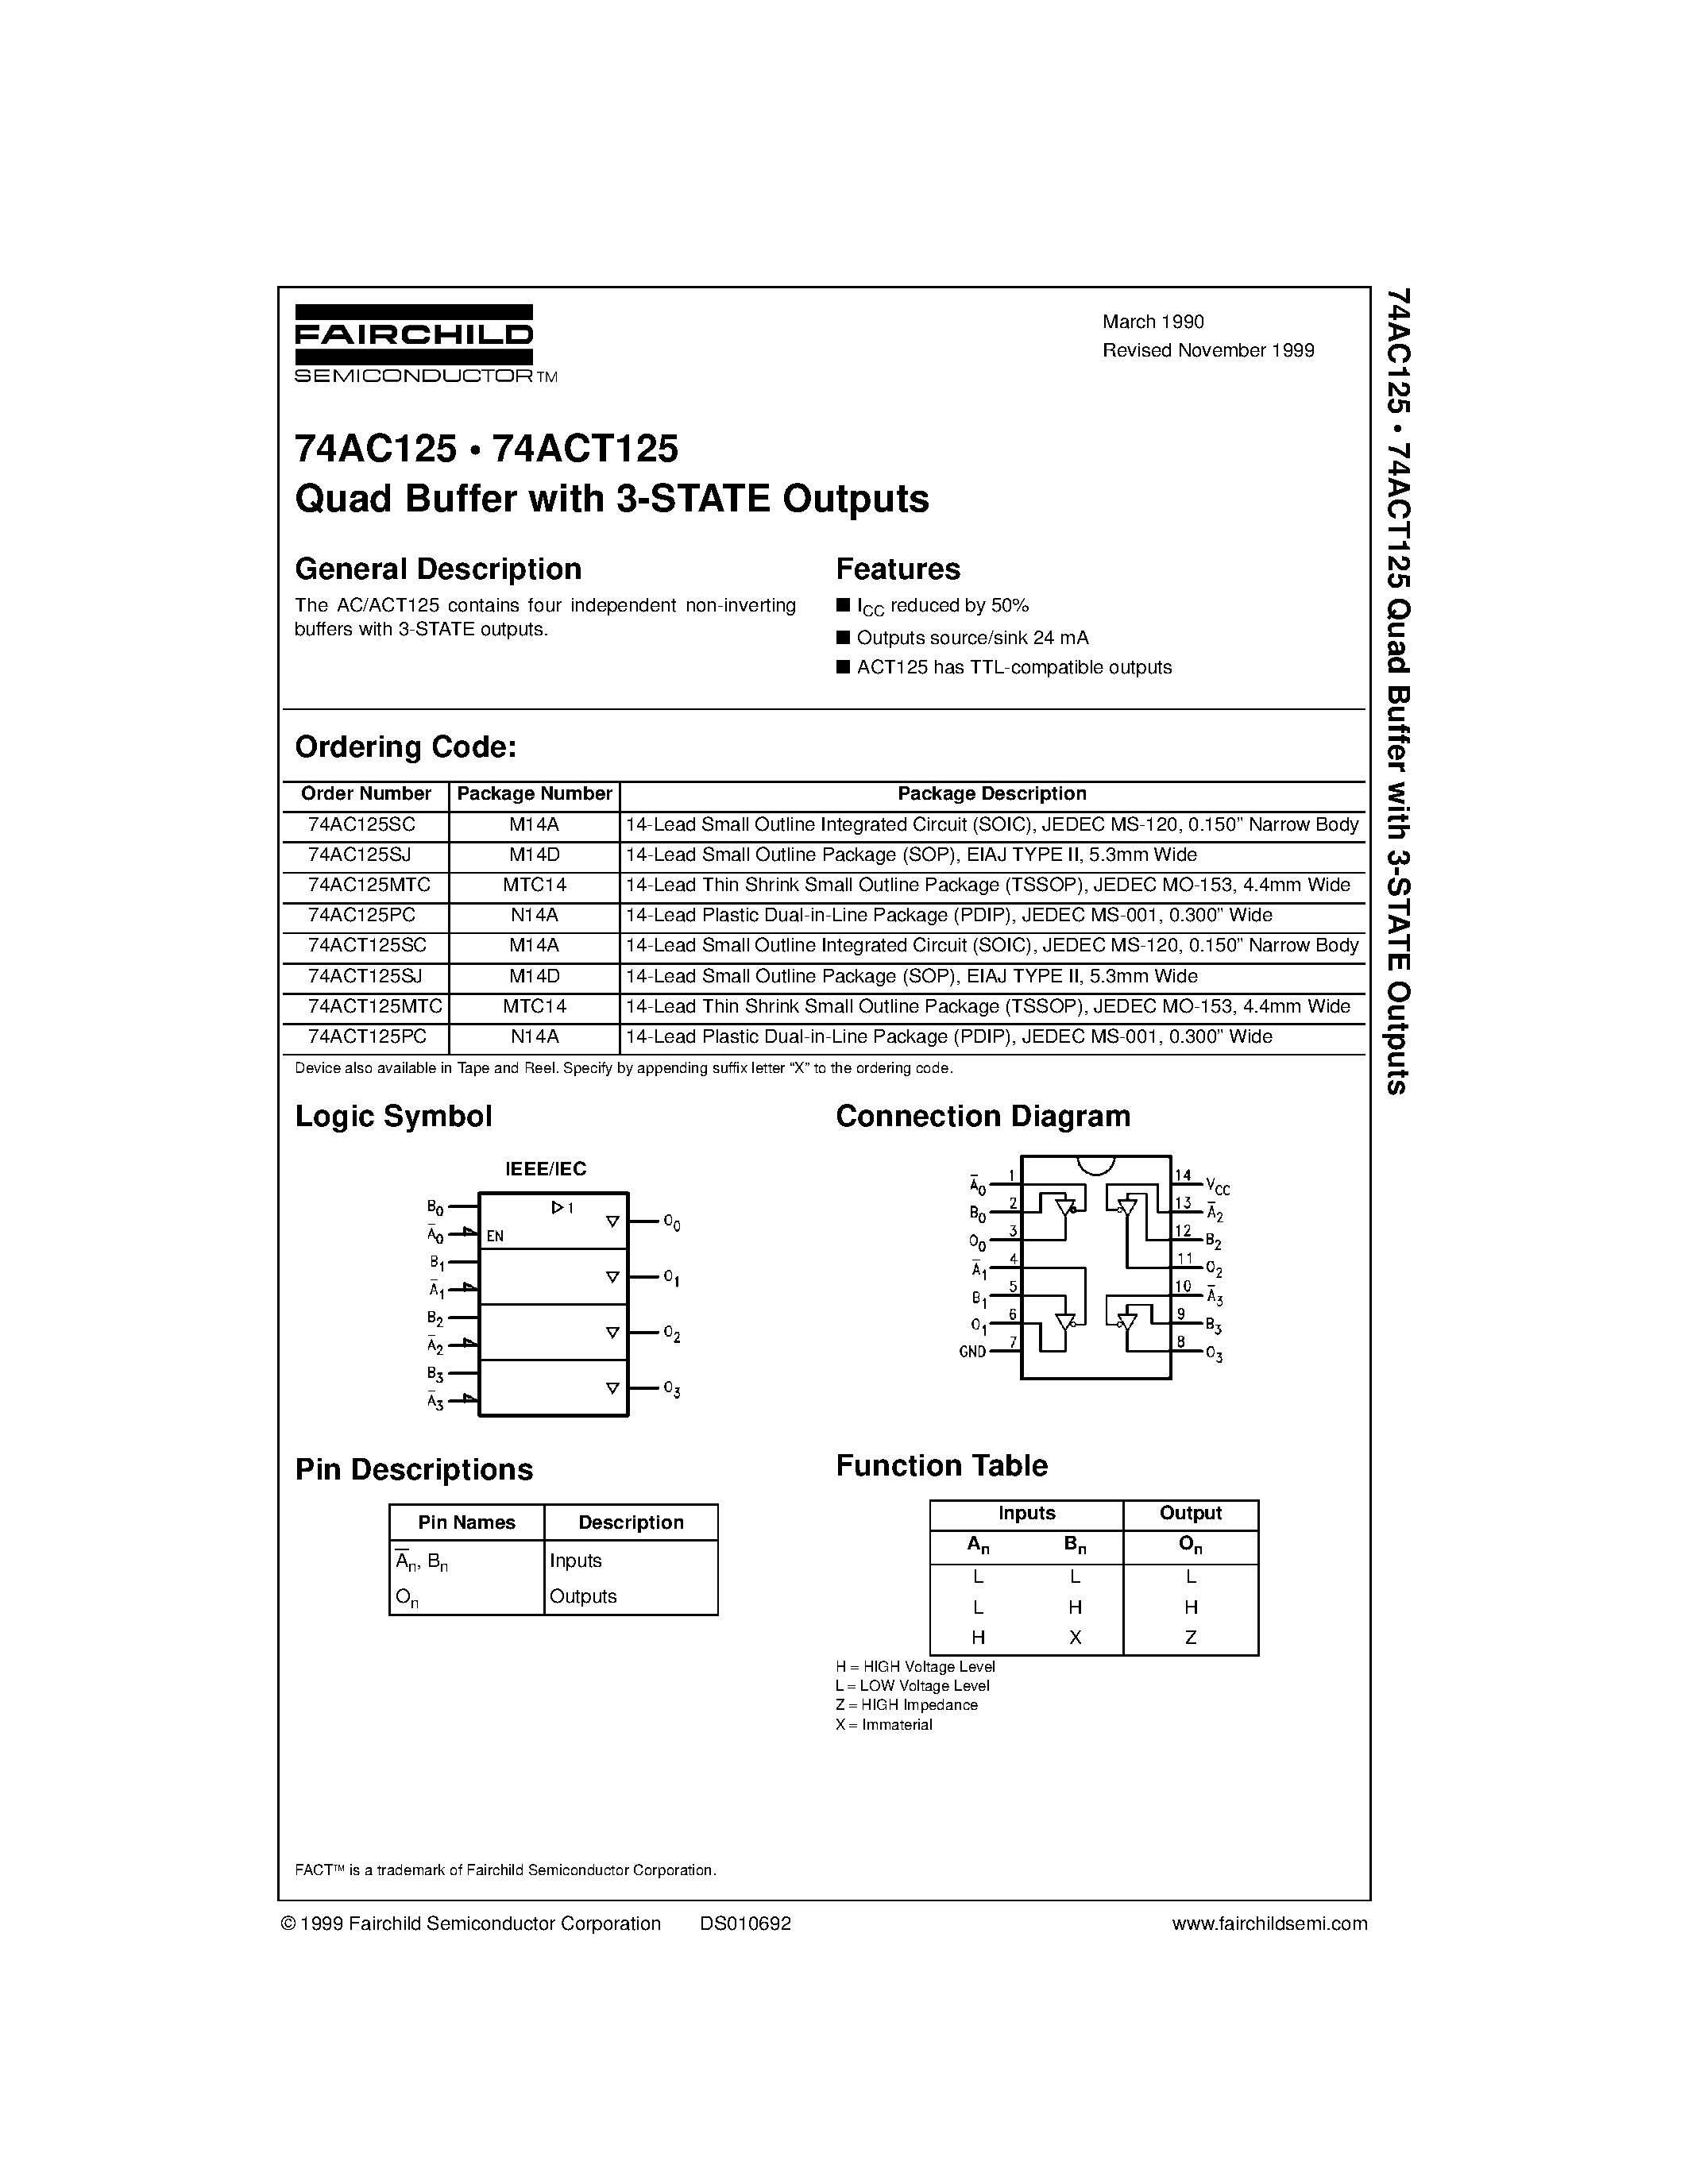 Datasheet 74AC125SJ - Quad Buffer with 3-STATE Outputs page 1